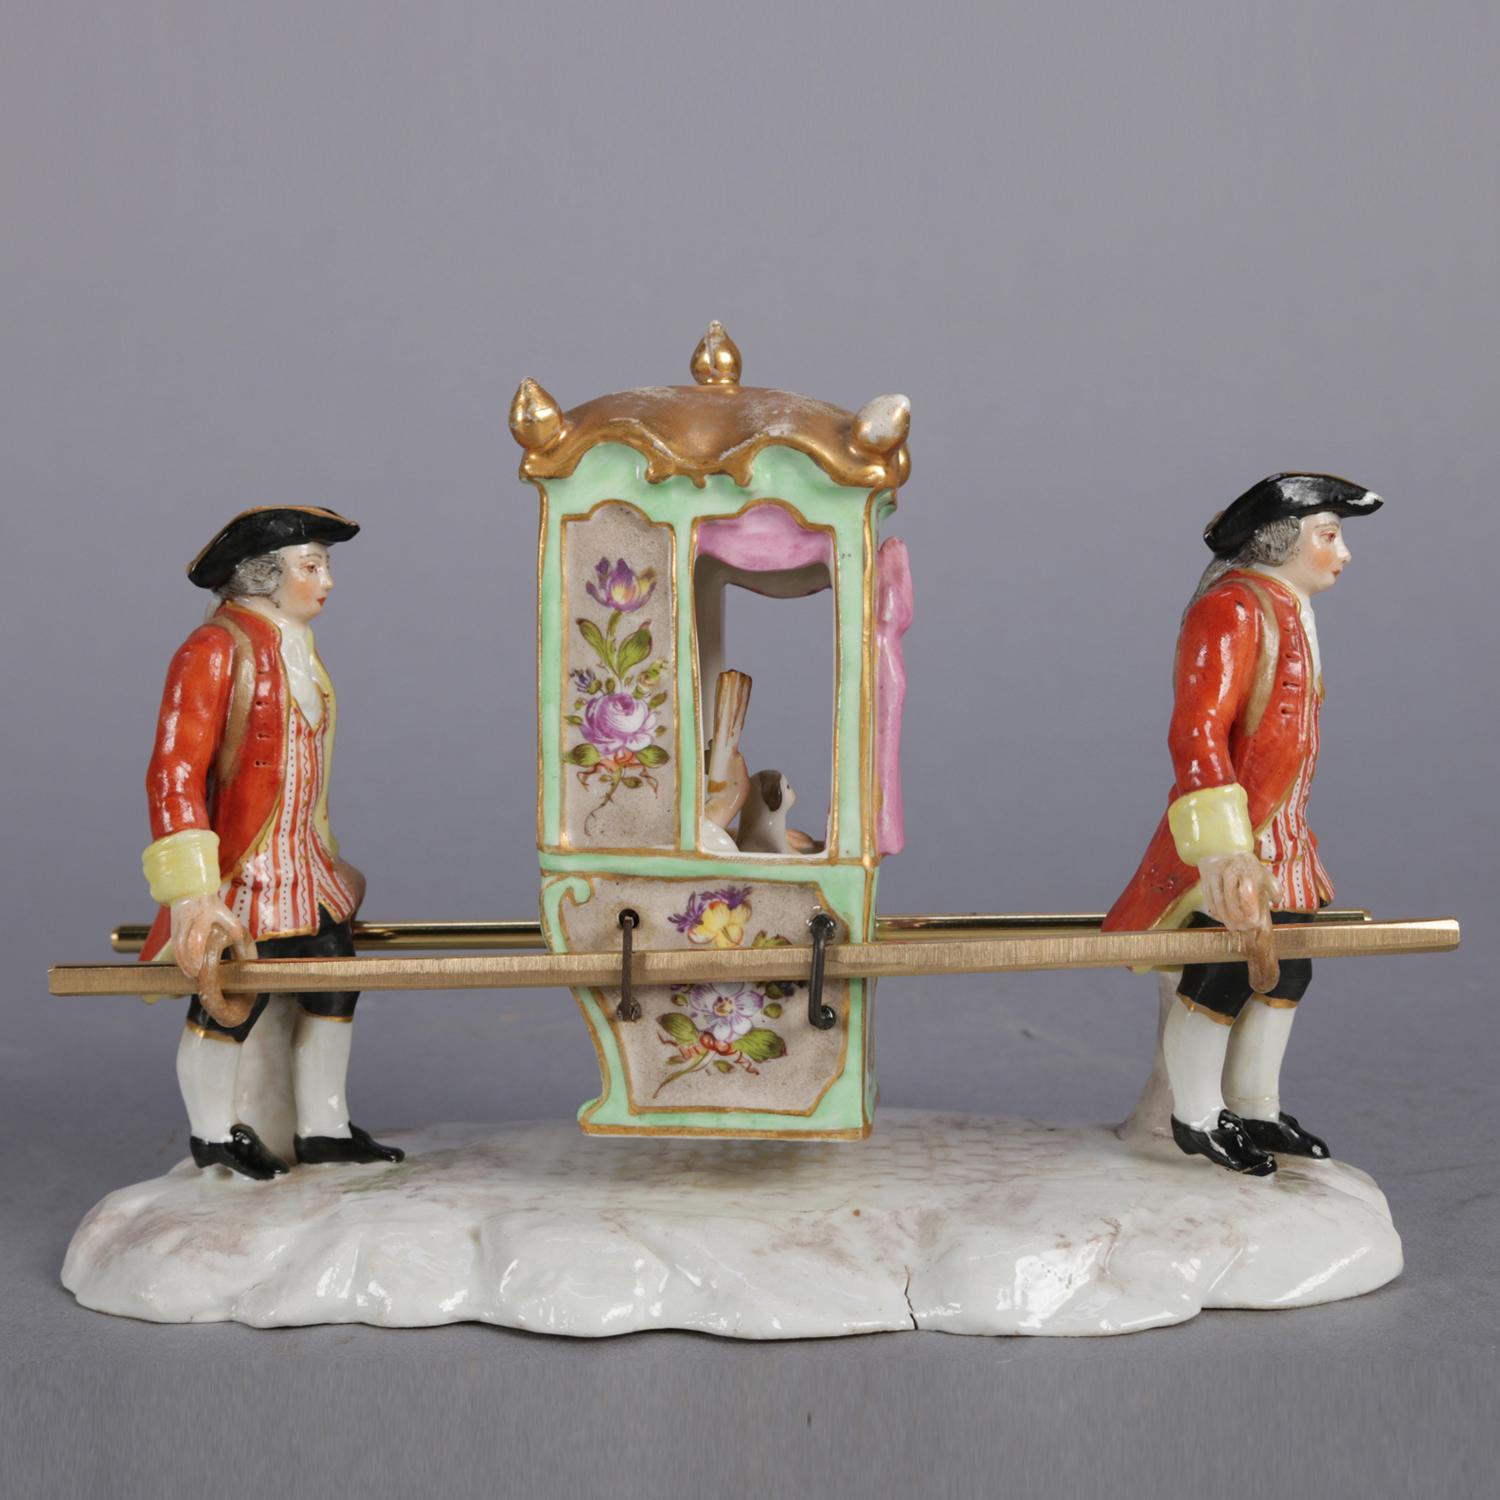 Antique German Meissen Porcelain features hand-painted and gilt figural group including two Colonial carriage handlers carrying a floral decorated litter with female passenger, possibly The Queen, en verso crossed sword Meissen mark, circa